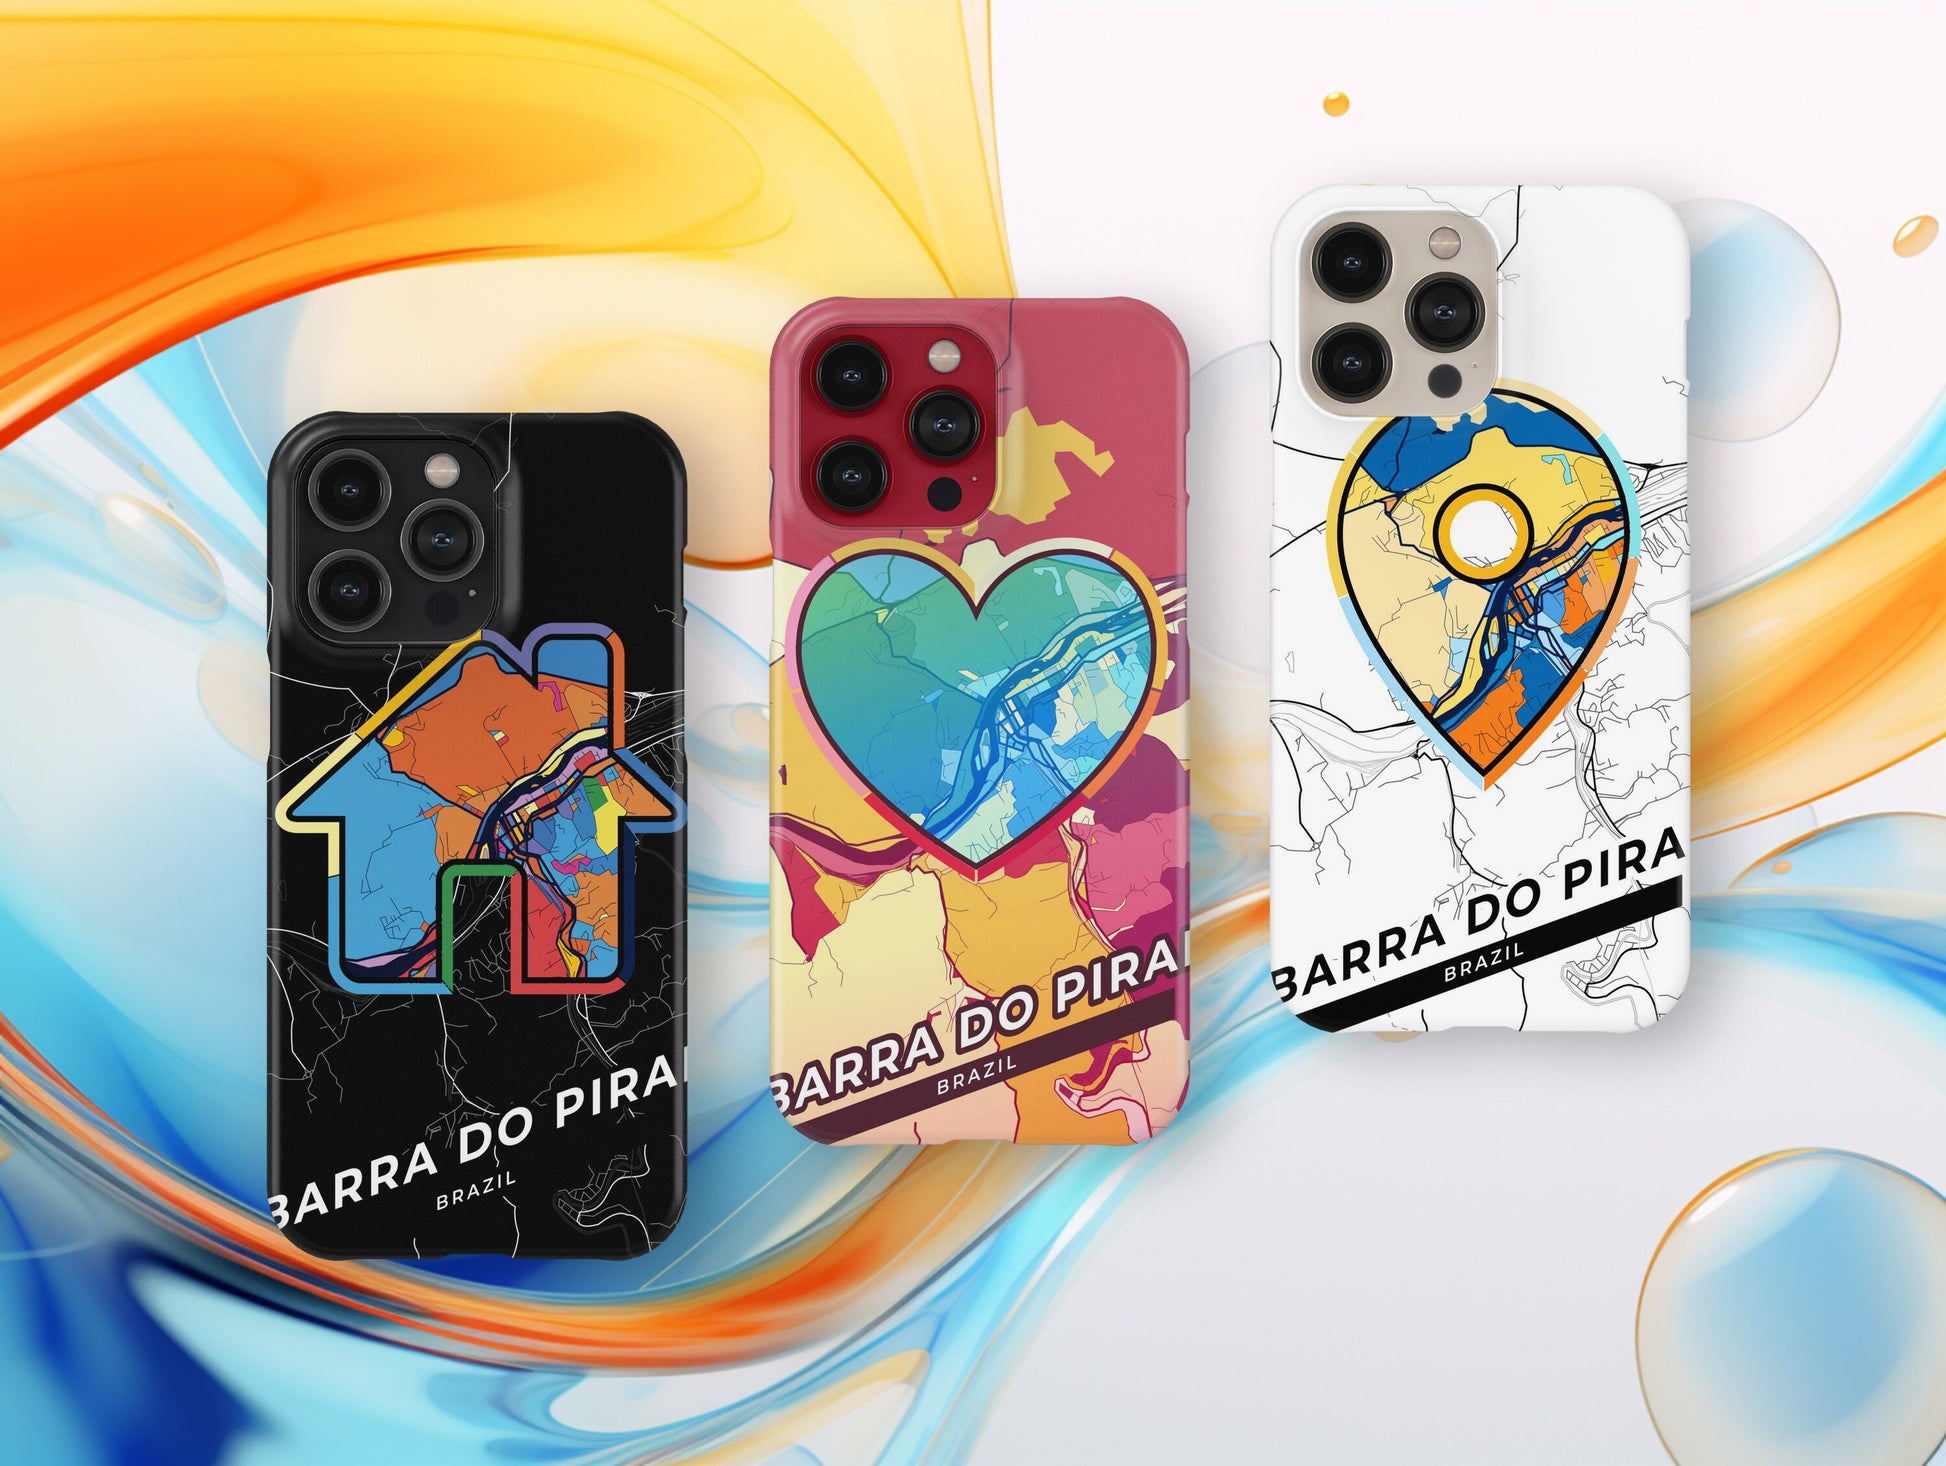 Barra Do Pirai Brazil slim phone case with colorful icon. Birthday, wedding or housewarming gift. Couple match cases.